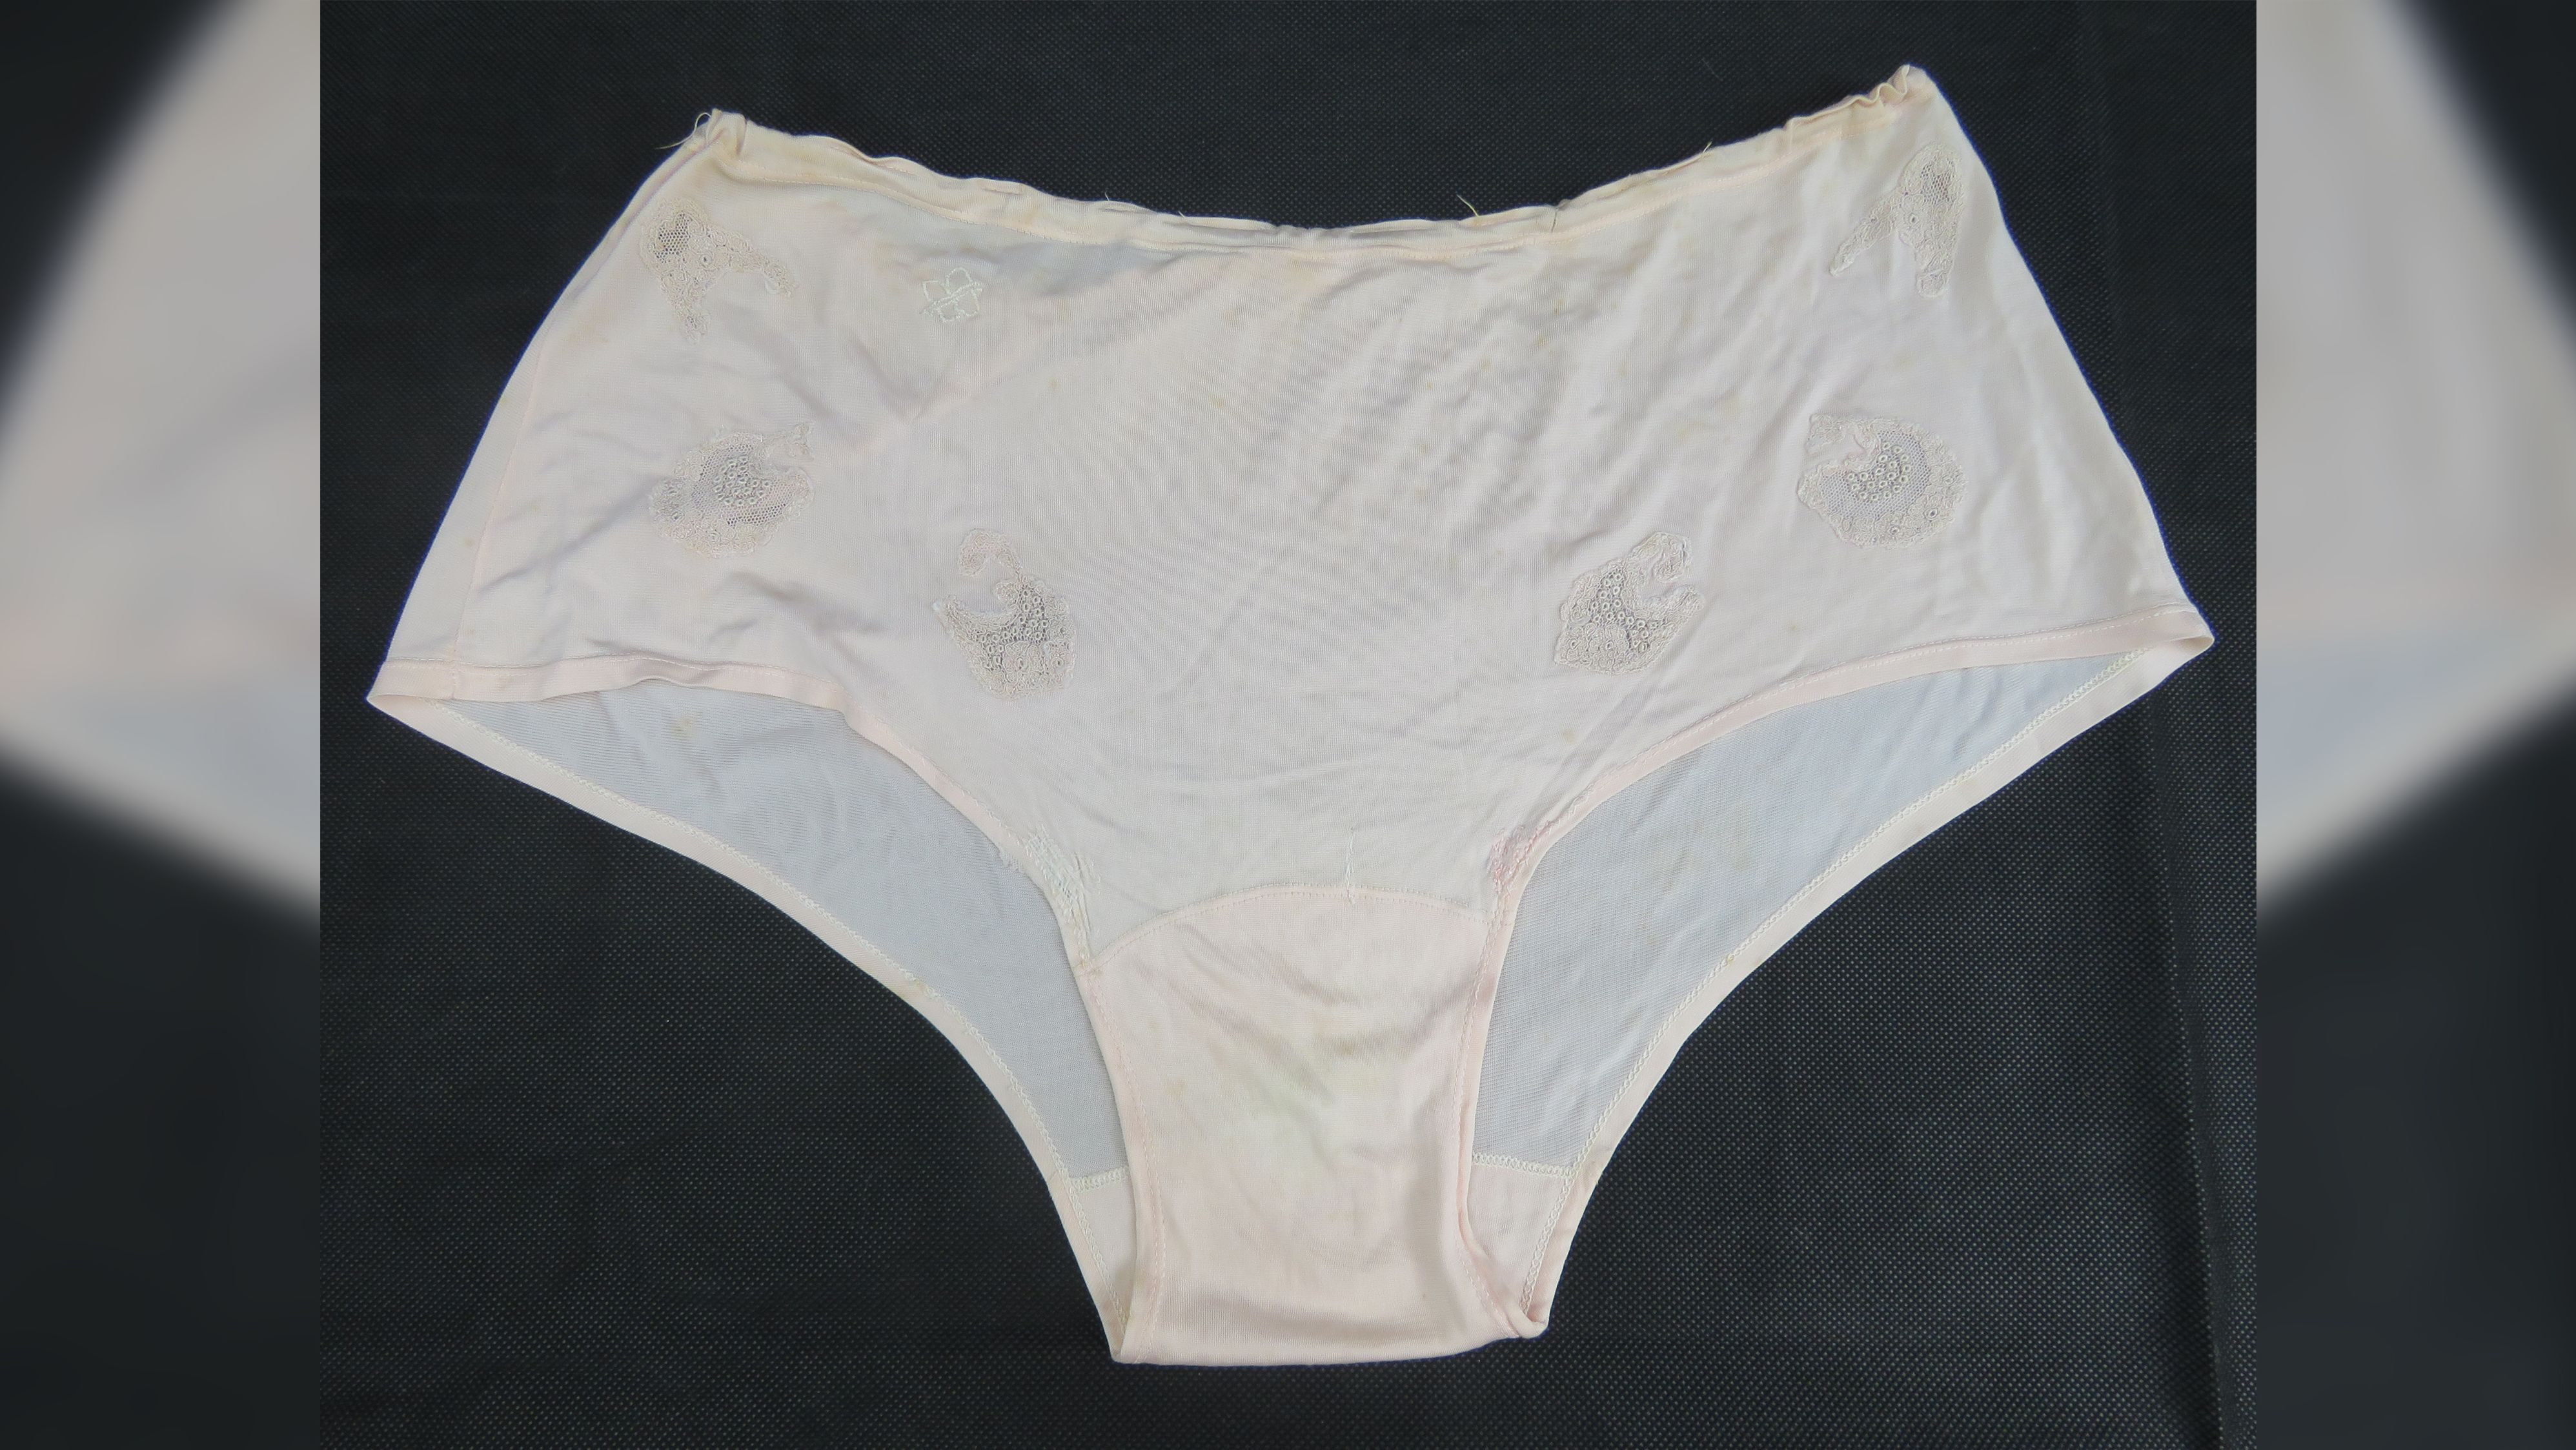 The silk underpants bearing Eva Braun's monogram were bought by an unknown buyer. 